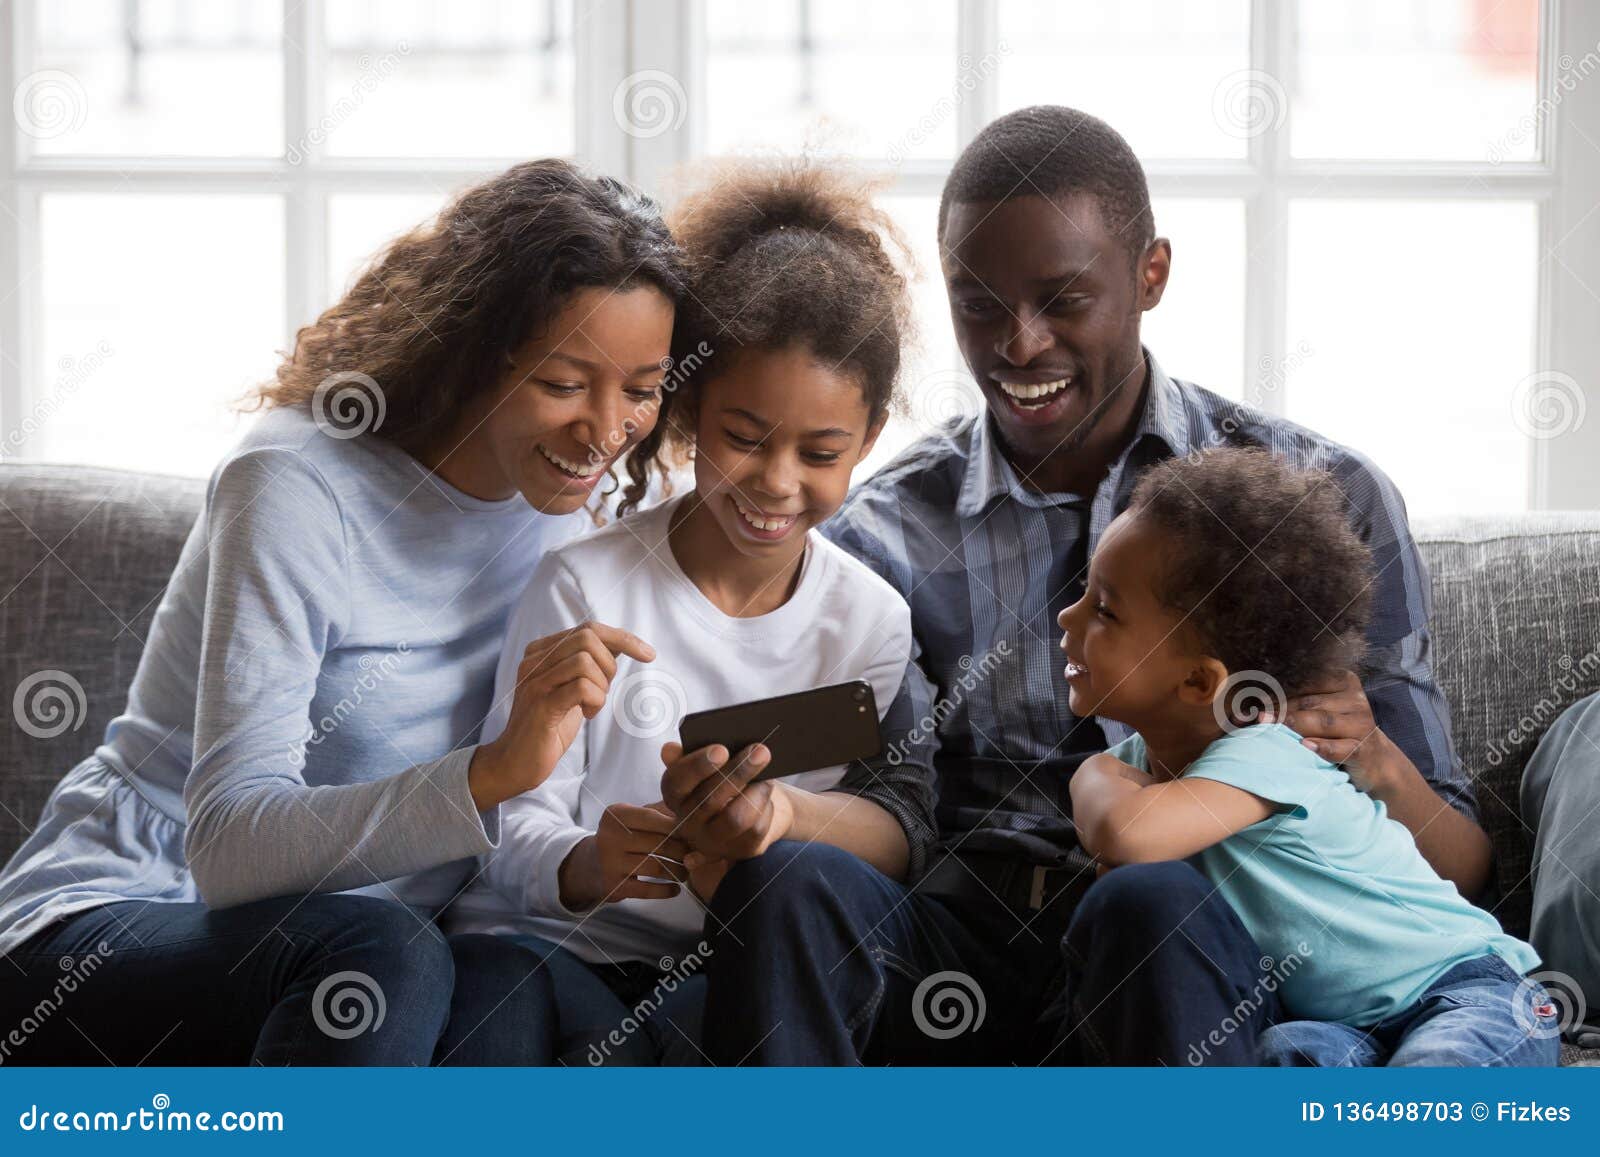 black family and kids laughing watching funny video on phone